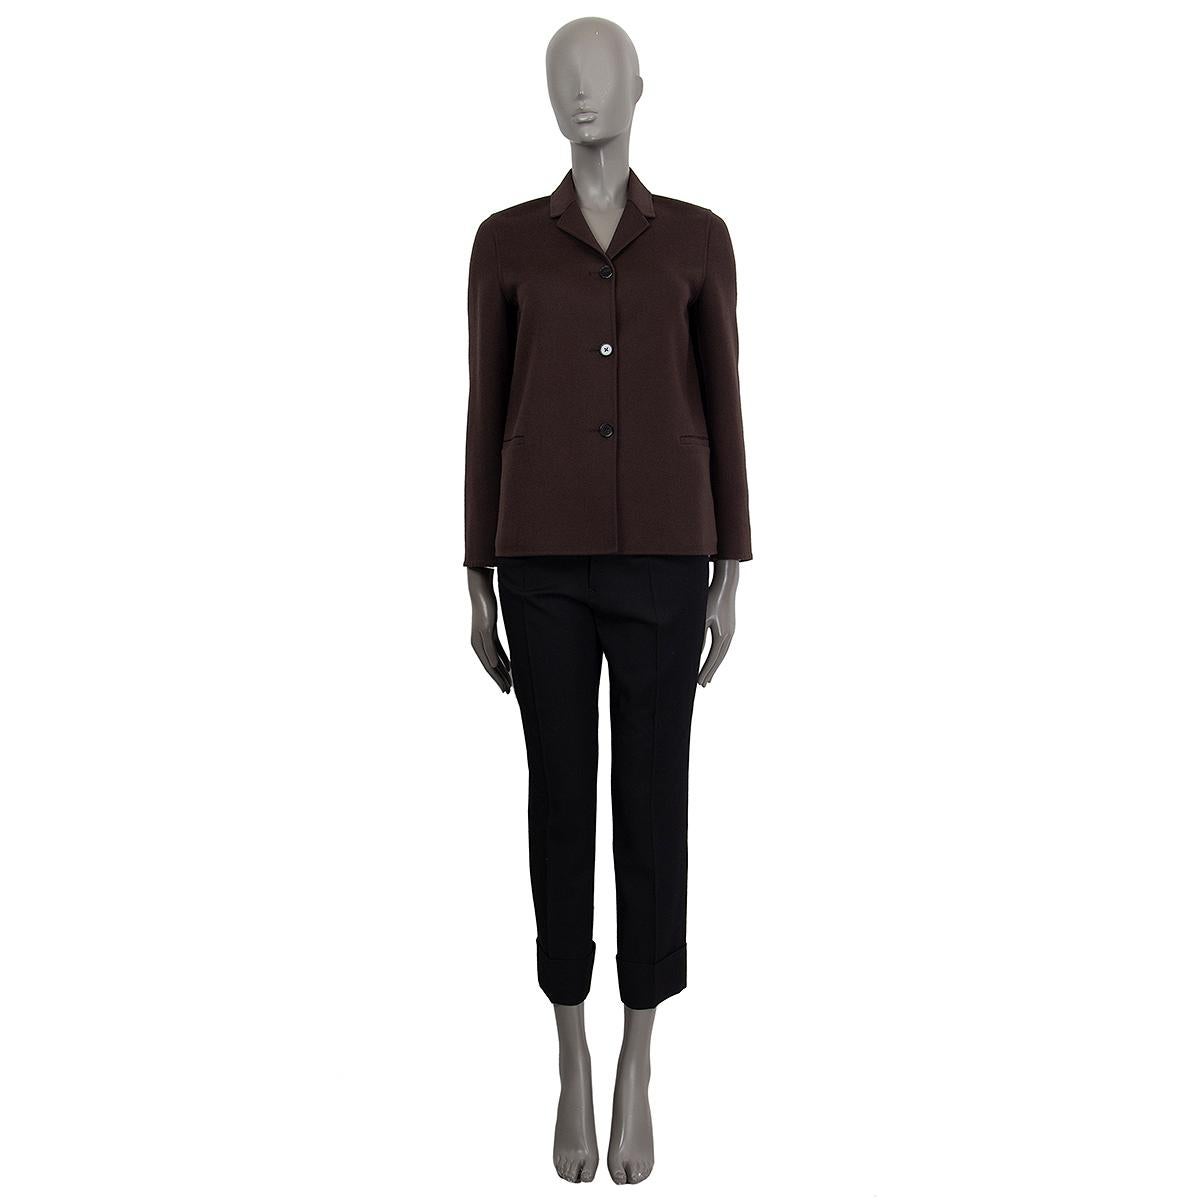 100% authentic Jil Sander blazer in brown cashmere (100%). Two open pockets on the front. Opens with three buttons on the front. Unlined. Has been worn and is in excellent condition.

Measurements
Tag Size	34
Size	XS
Shoulder Width	40cm